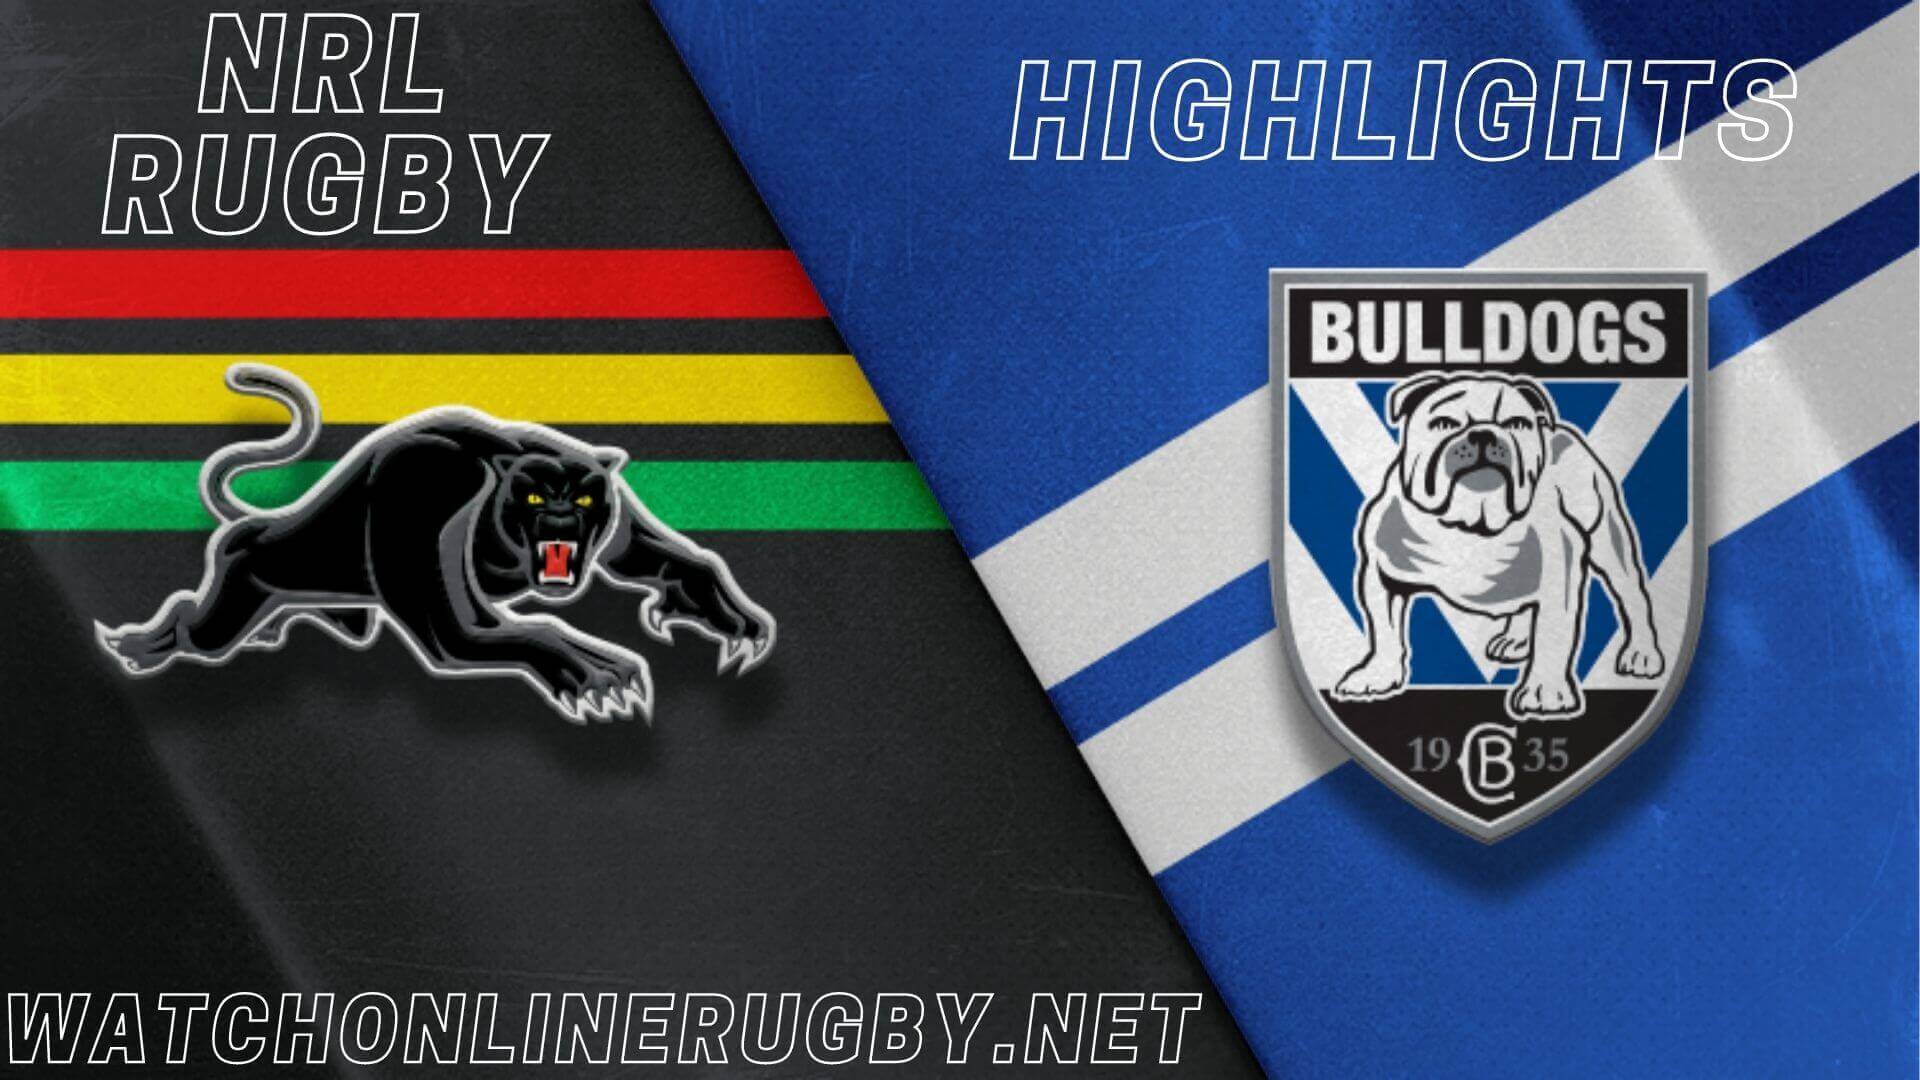 Panthers Vs Bulldogs Highlights RD 13 NRL Rugby